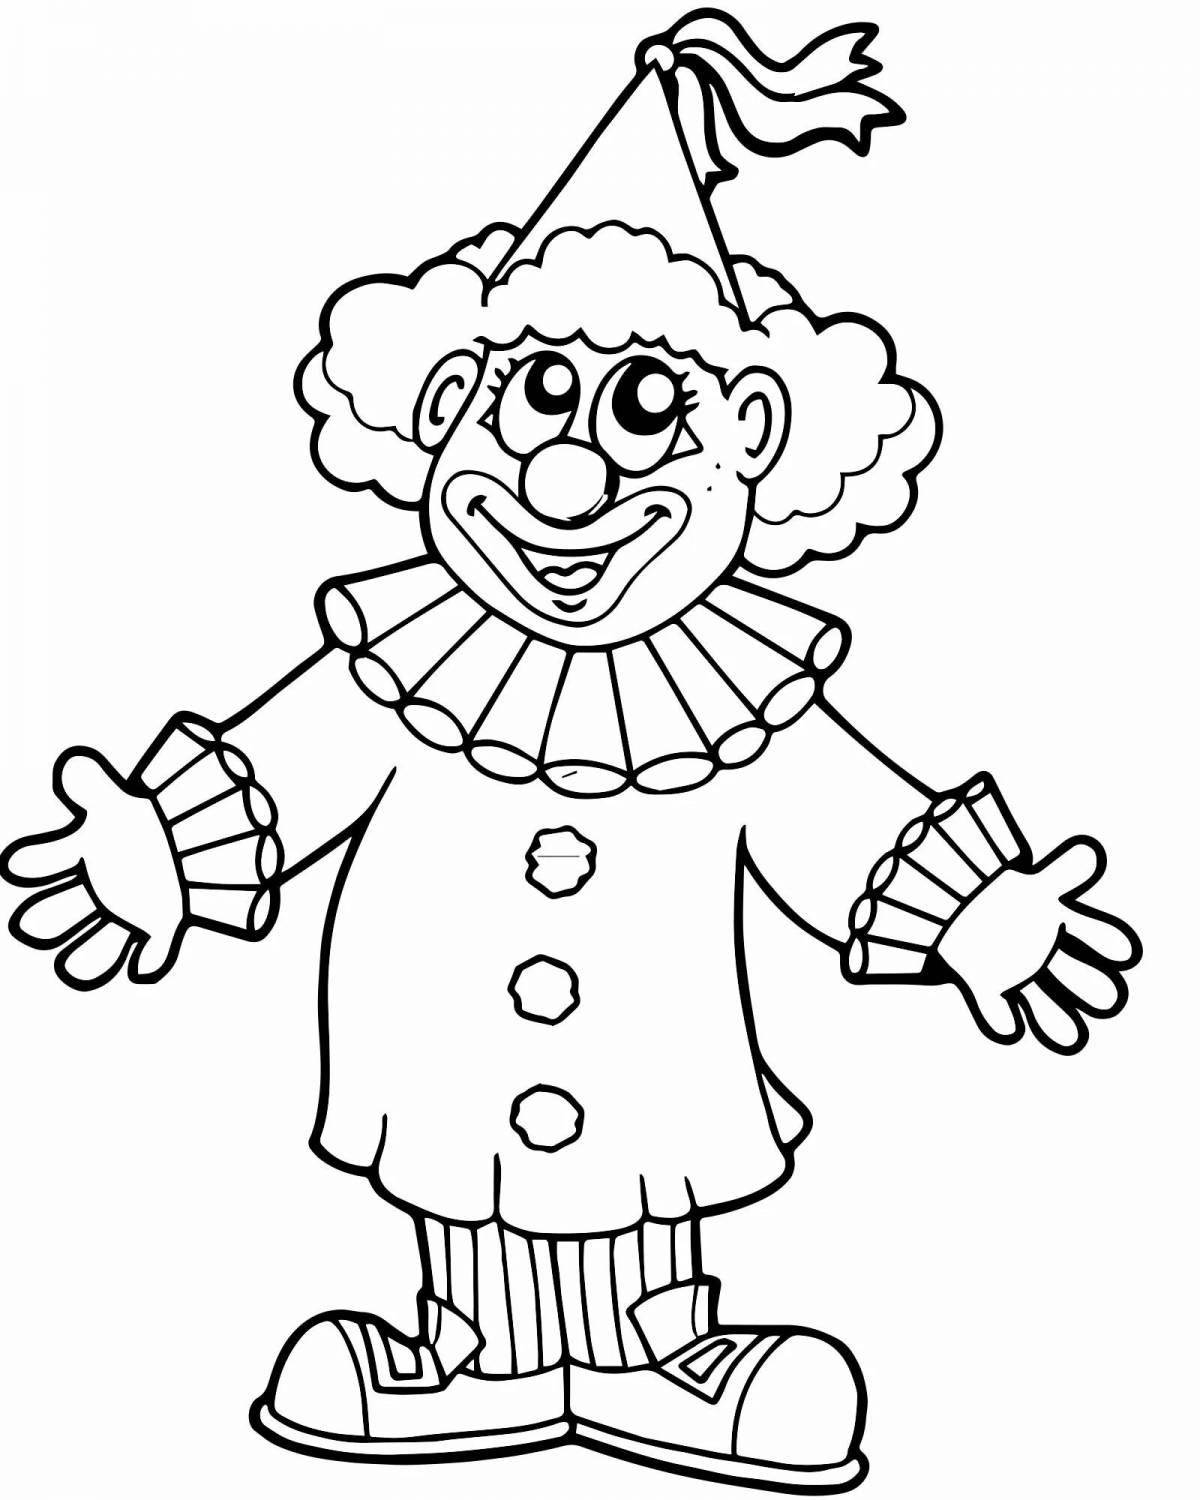 Animated coloring book funny clown for kids